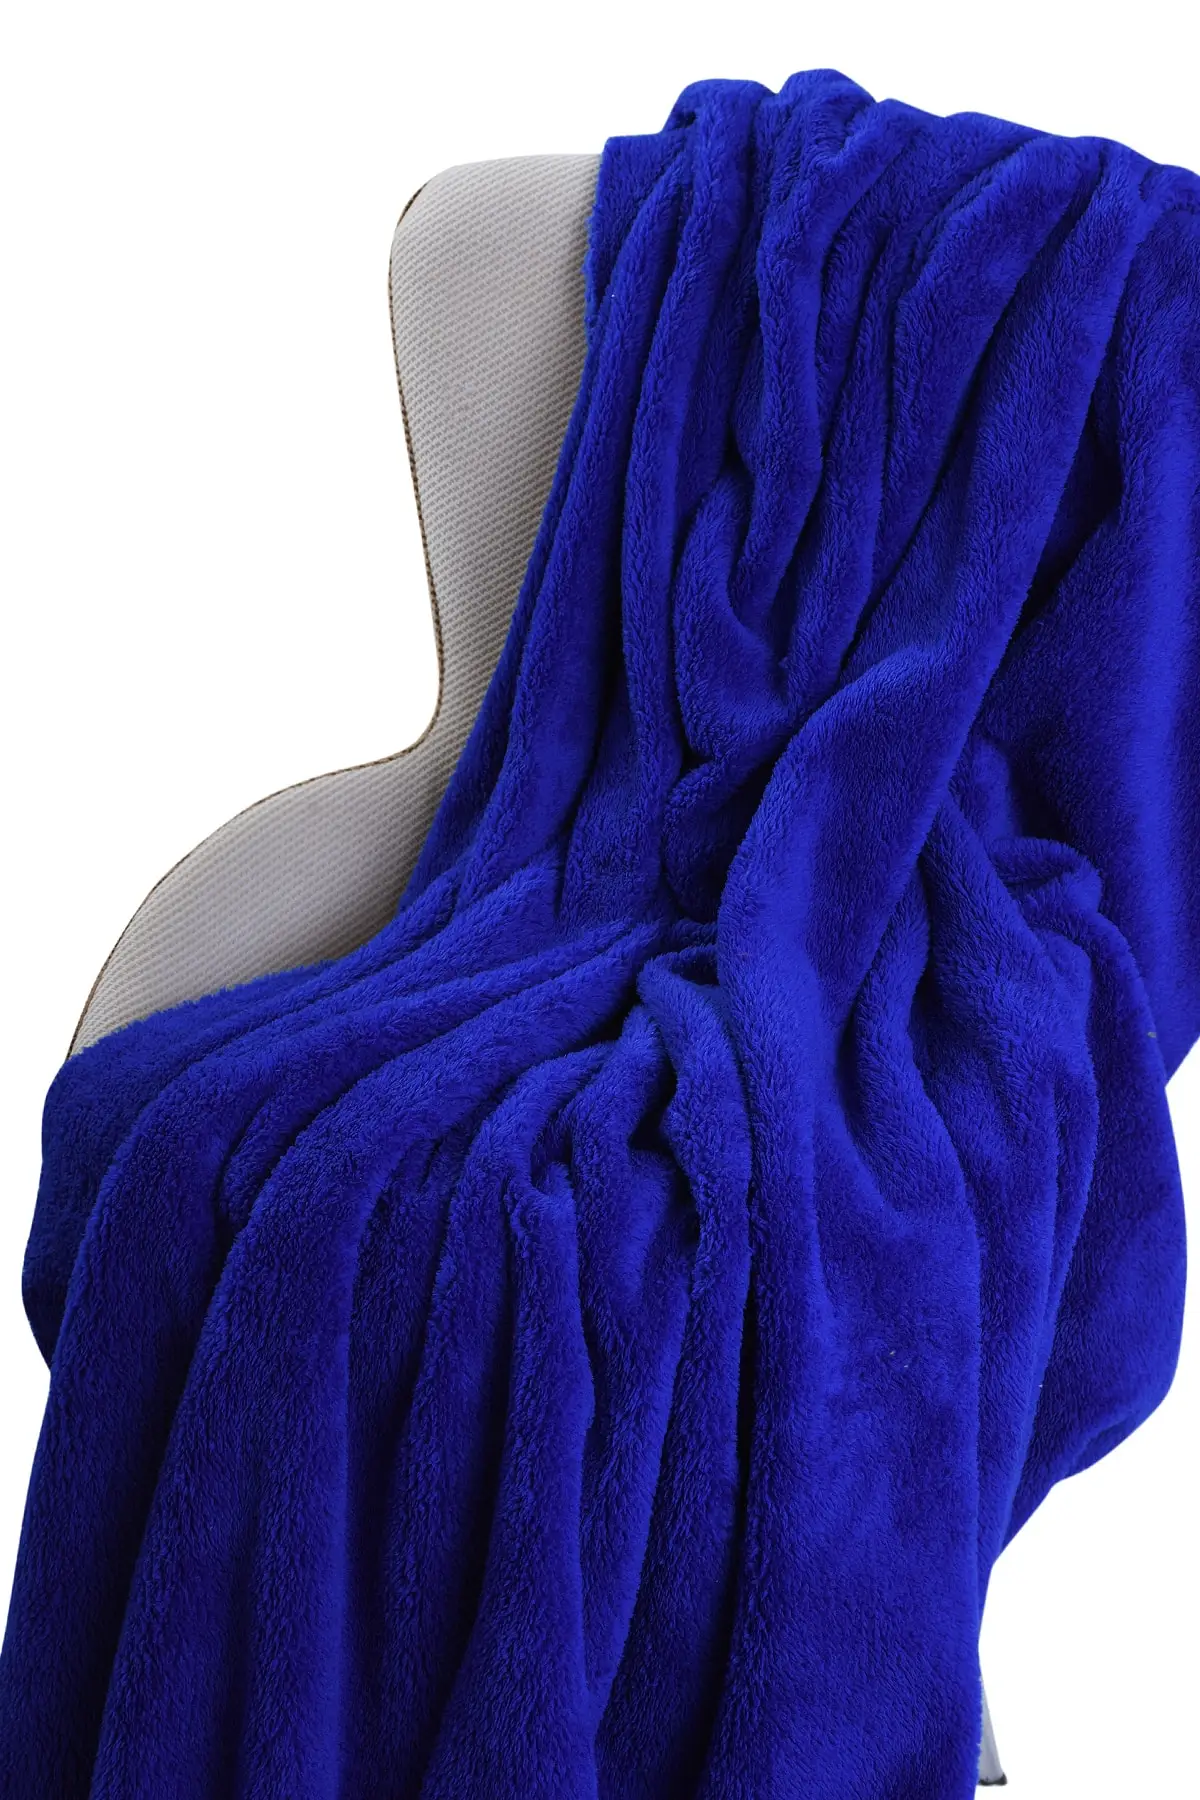 

Lux Wellsoft Double Personality Soft Textured Tv Battaniyesi Royal Blue Polyester 200x220 Single Size Blanket Bedroom